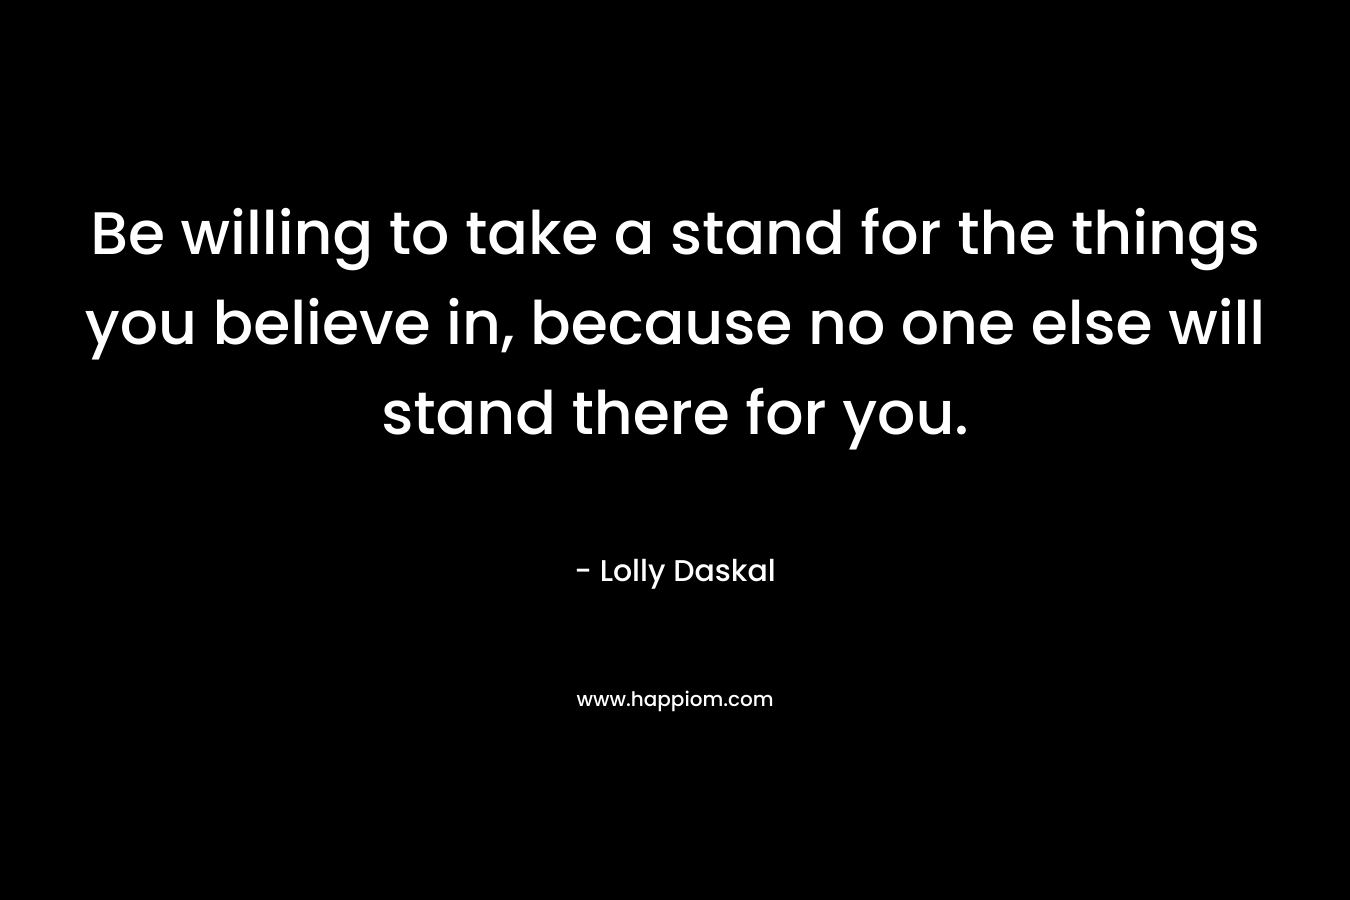 Be willing to take a stand for the things you believe in, because no one else will stand there for you.